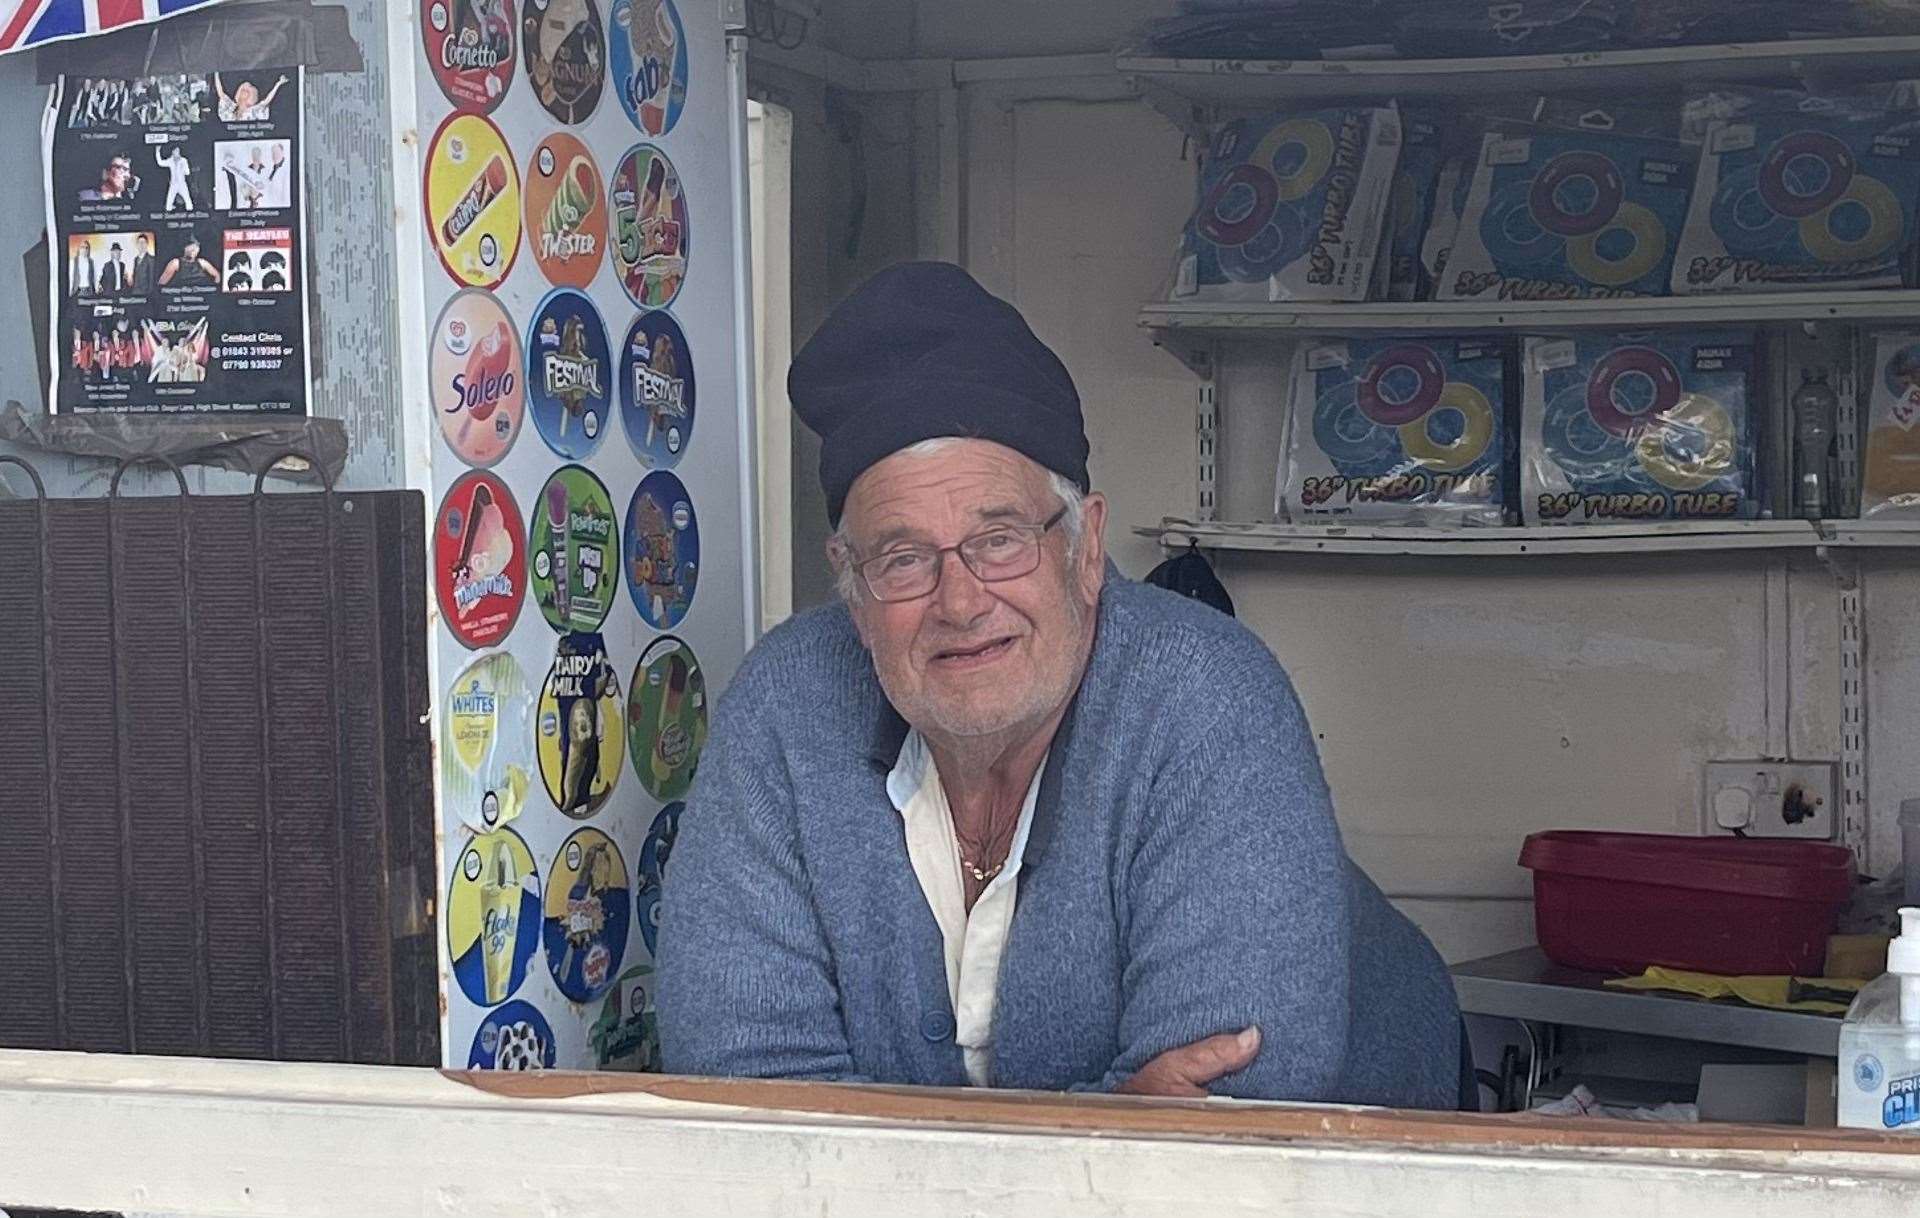 Tony Hobbs, 73, works at the West Bay Kiosk and said he lost a lot of trade due to the occurrence